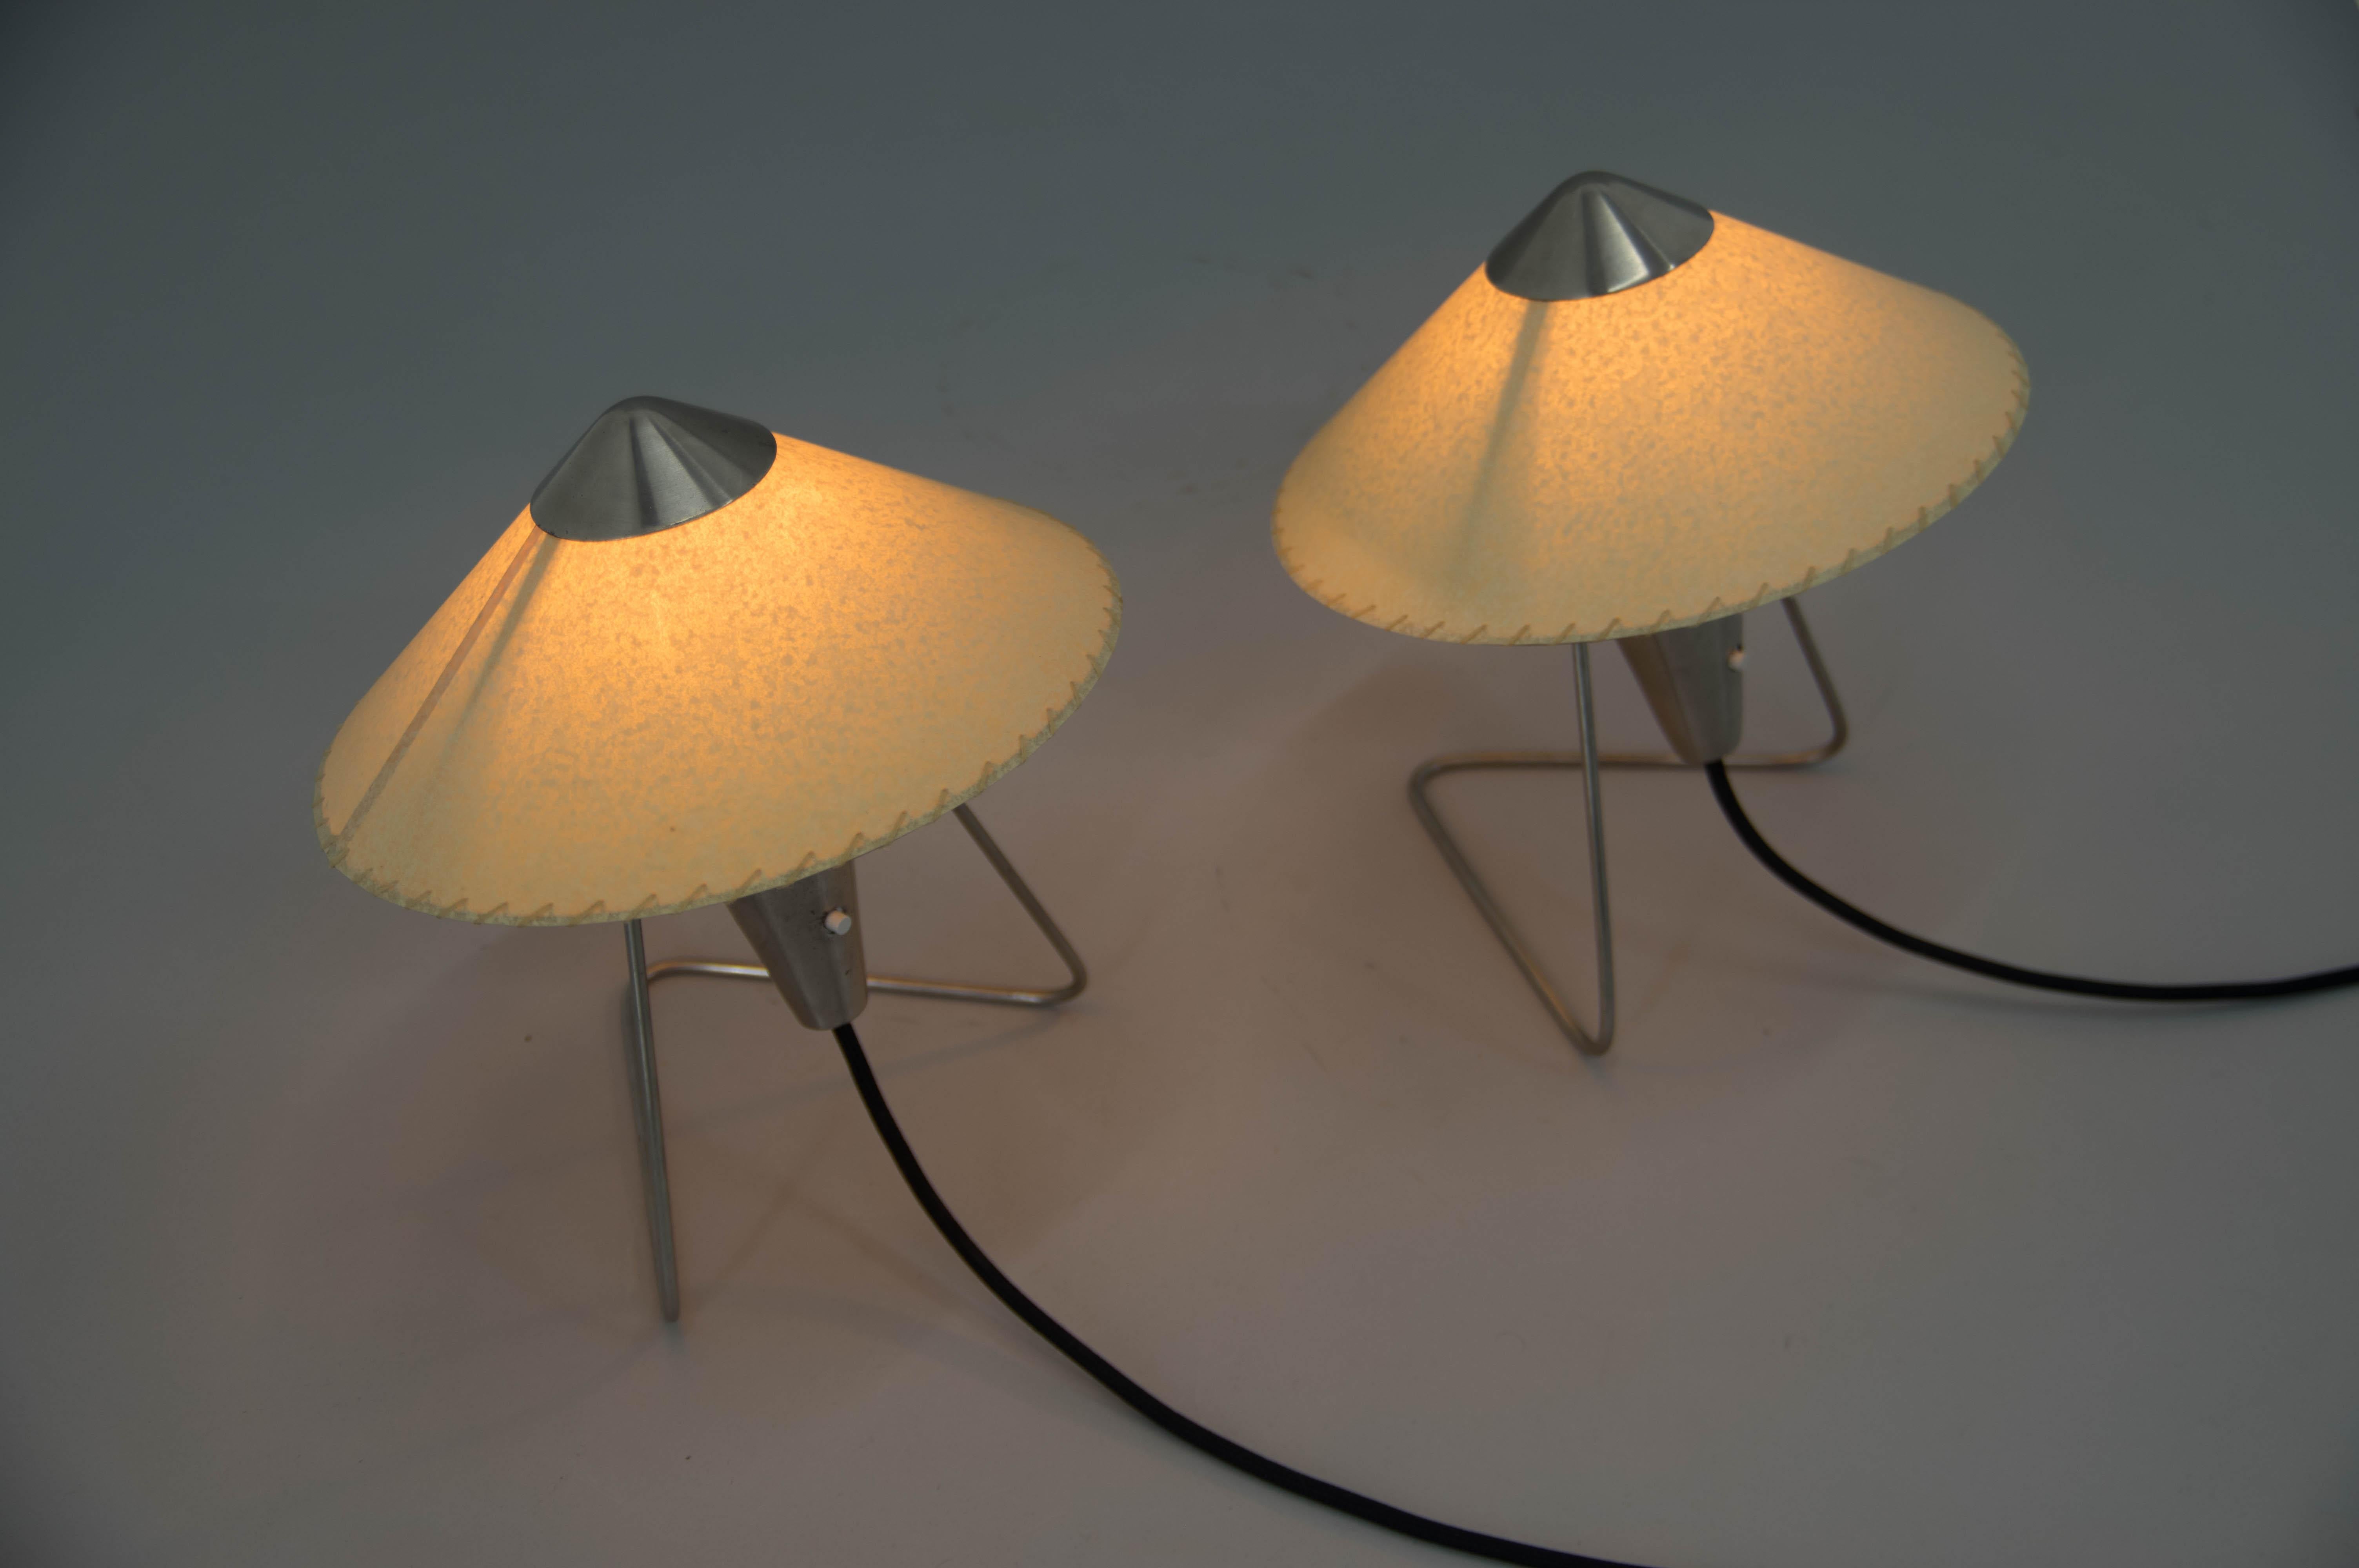 Mid-Century Modern Set of Two Table or Wall Lamps by Frantova for OKOLO, Czechoslovakia, 1950s